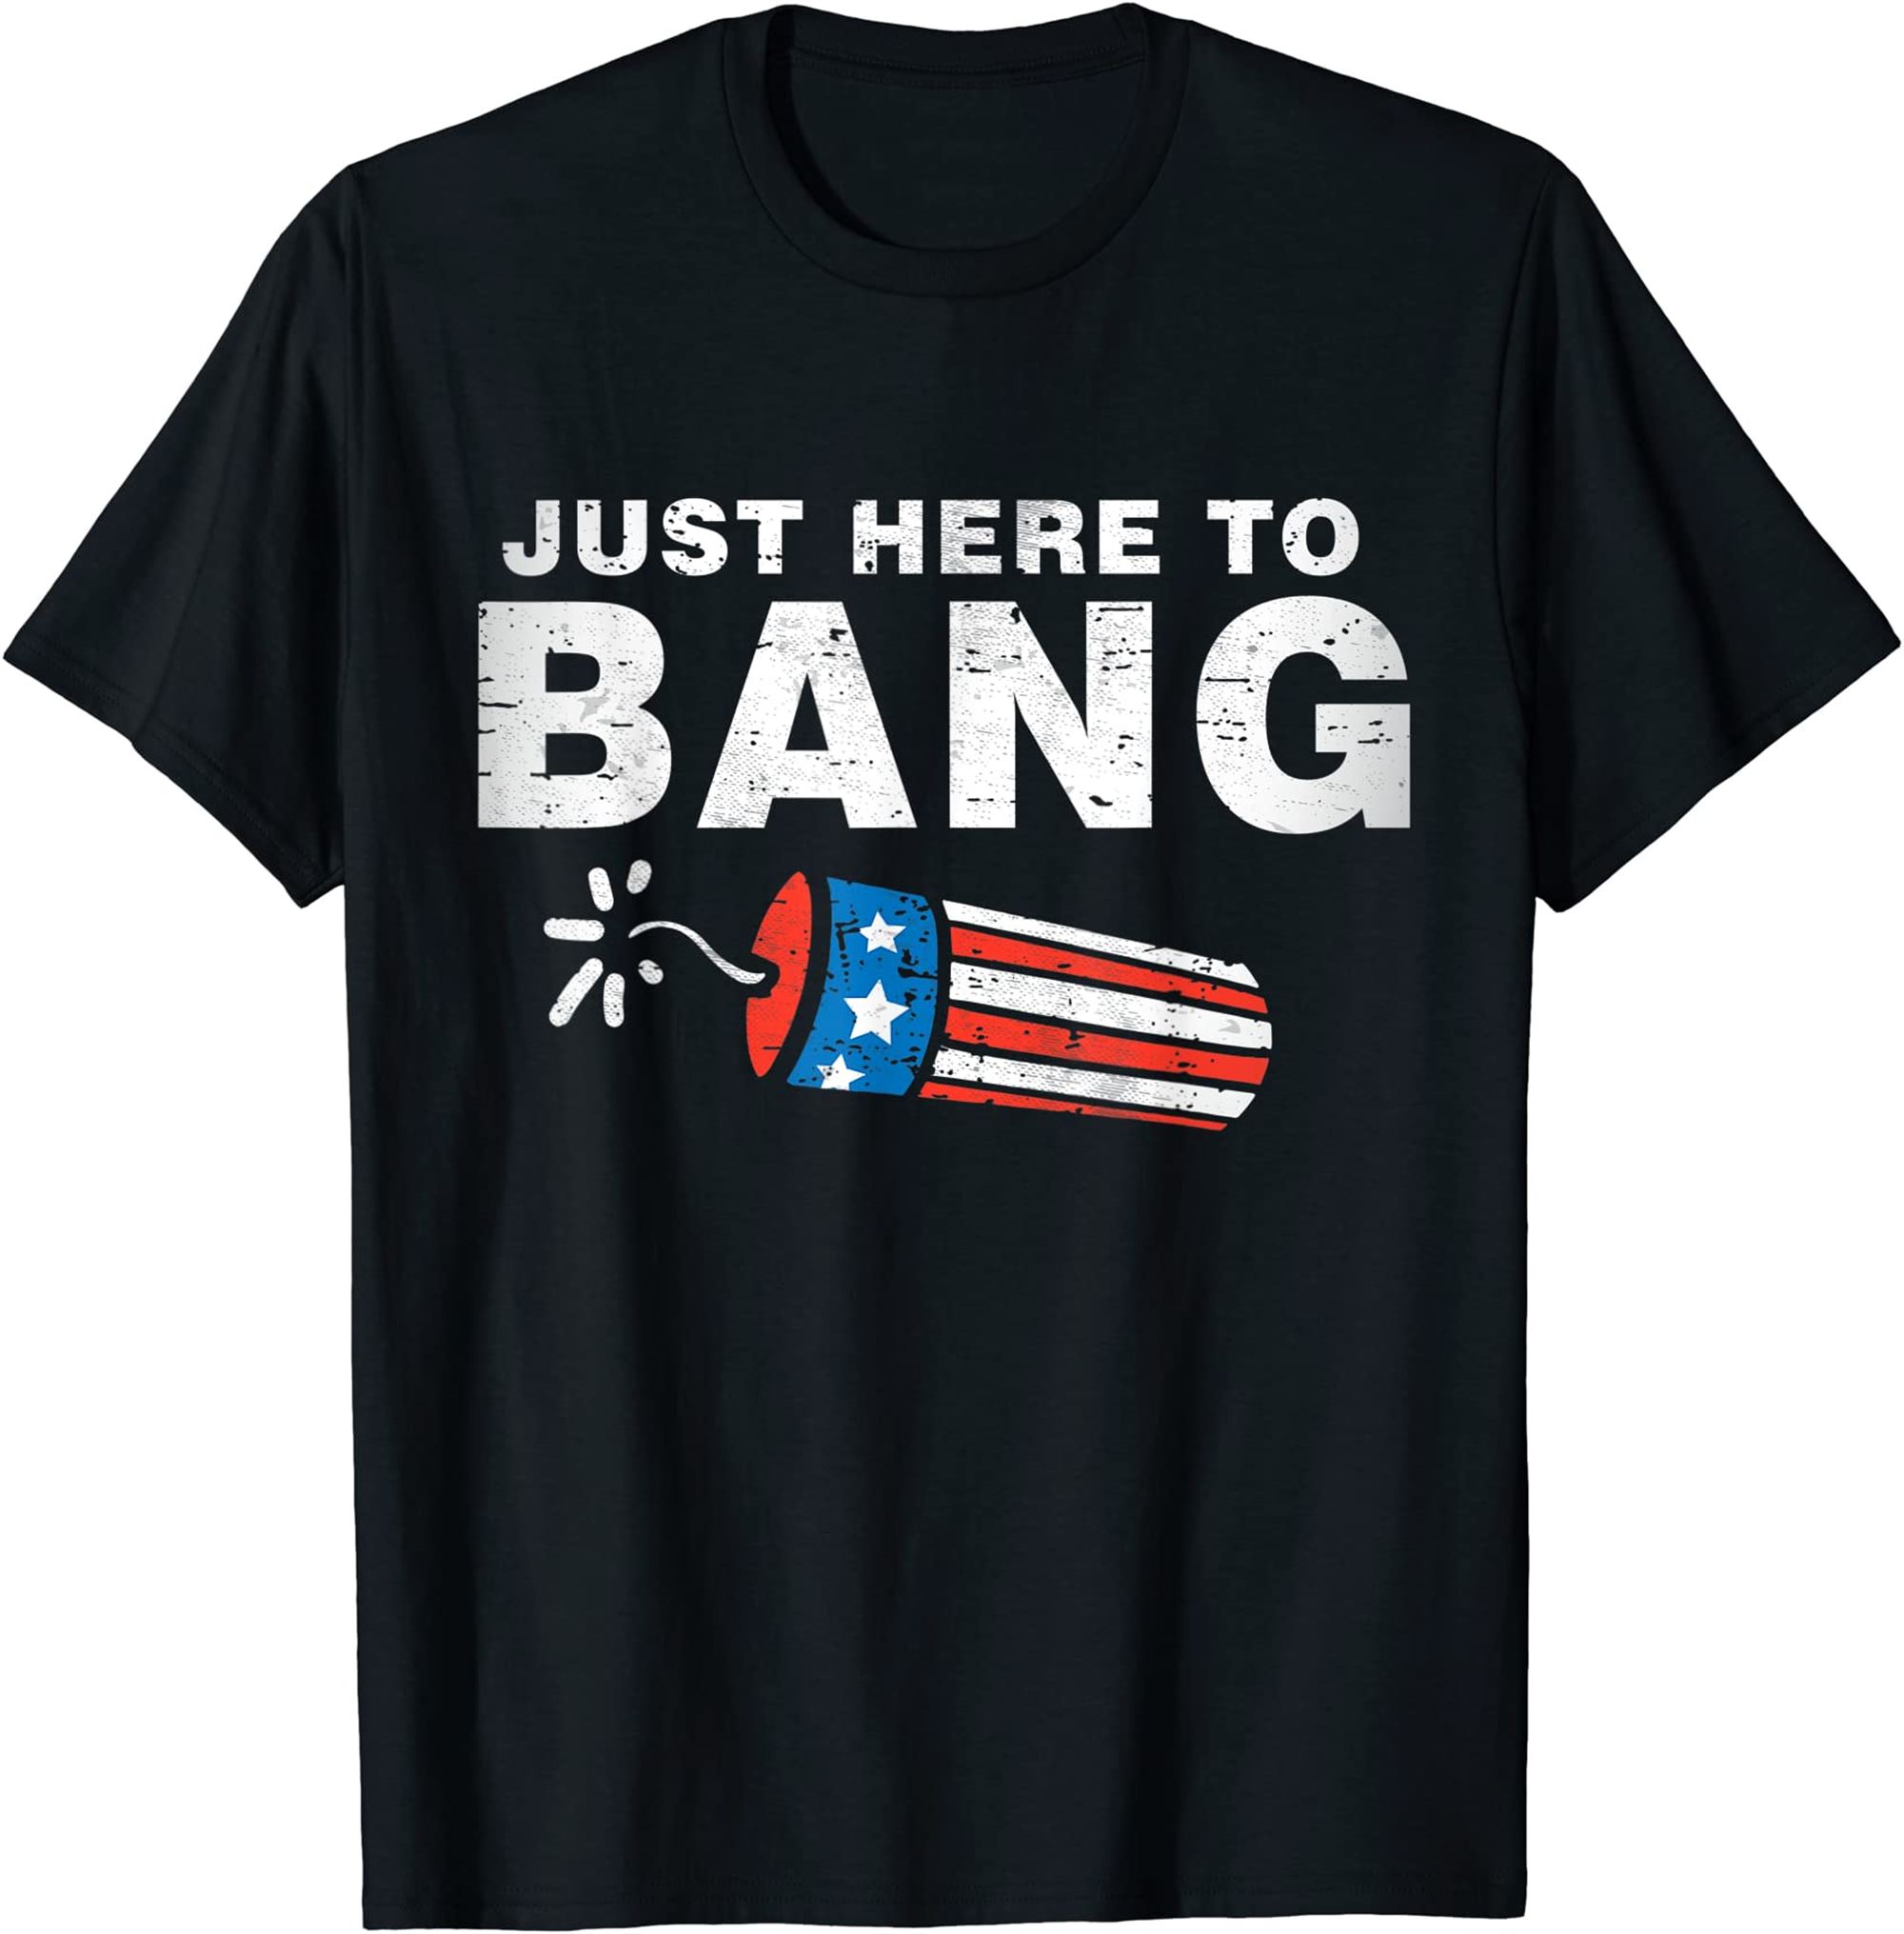 Just Here To Bang Funny Fireworks 4th Of July Boys Men Kids T-shirt Plus Size Up To 5xl